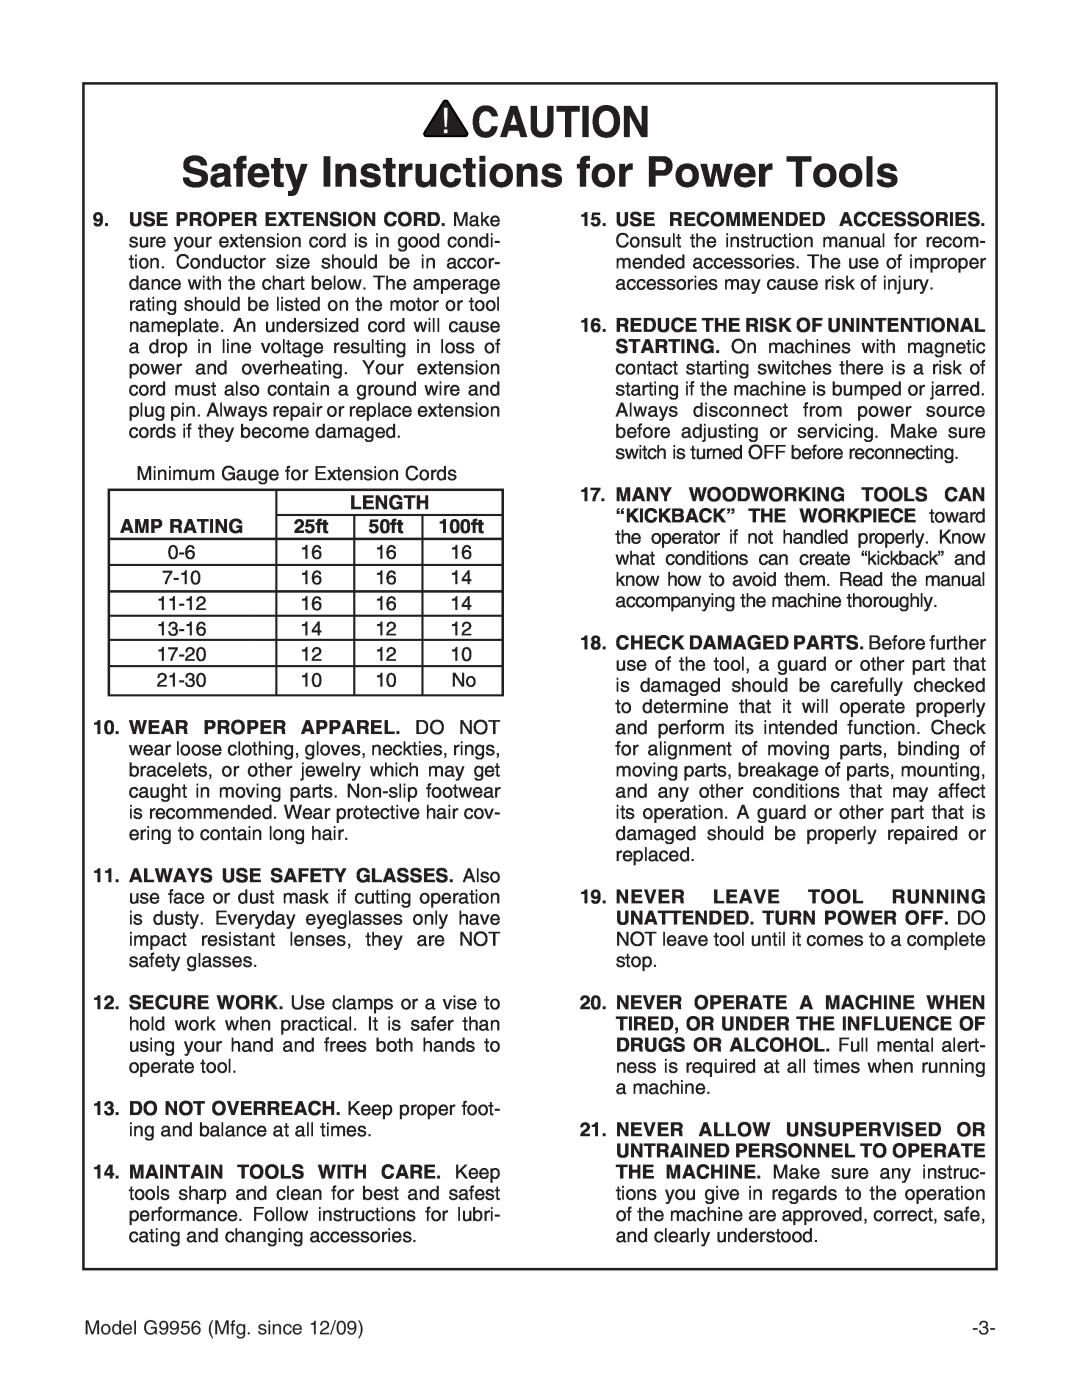 Grizzly G9956 instruction manual Safety Instructions for Power Tools, Length 